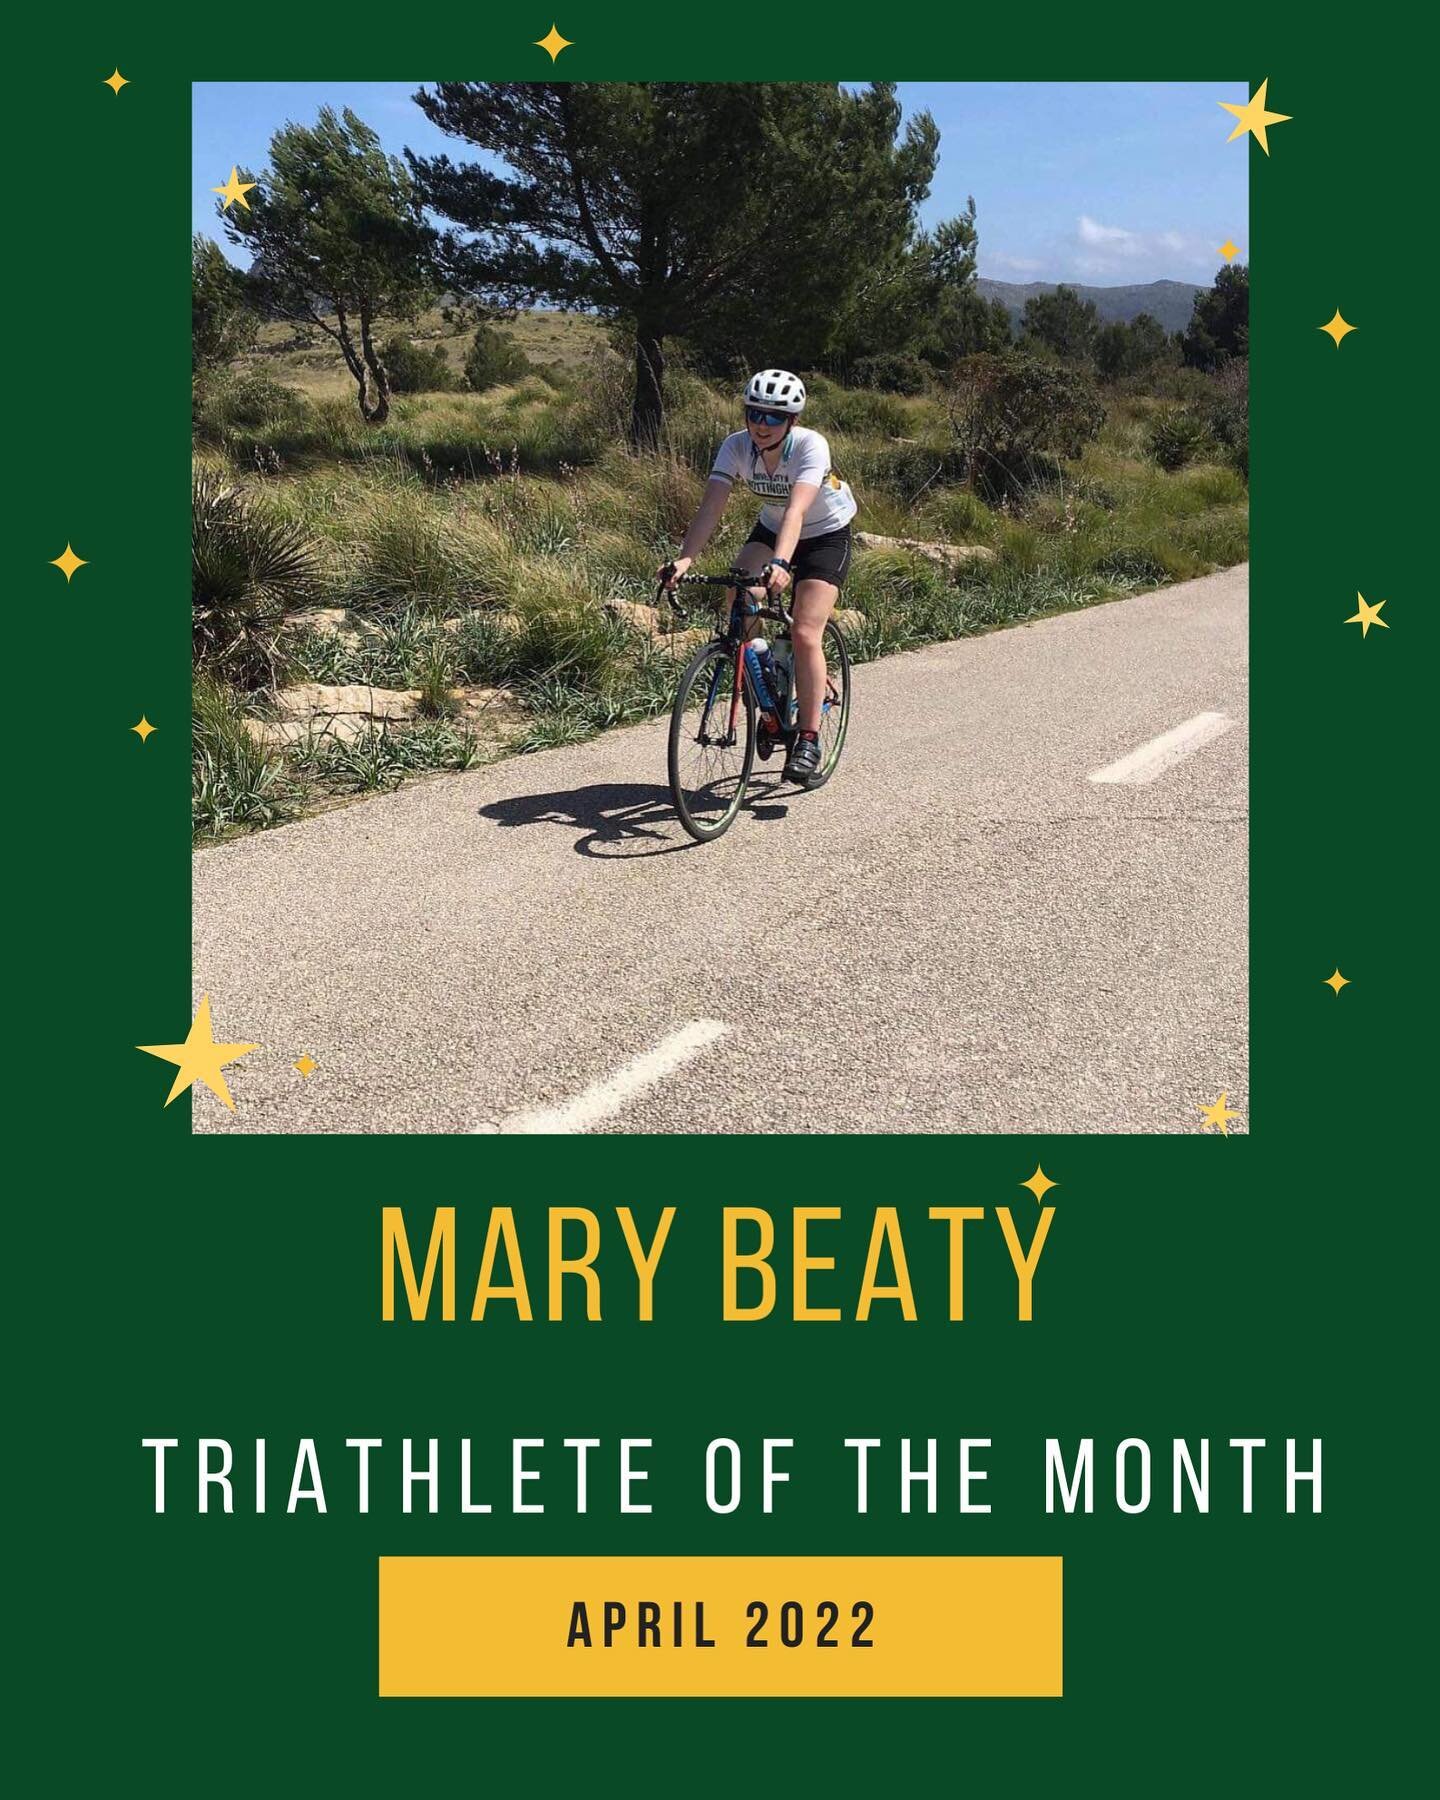 TRIATHLETE OF THE MONTH
Congratulations to our welfare officer @mary.beaty 
Mary is a wonderful member of UoNTri (and has been for 3yrs) and is ALWAYS looking out for others! 

Mary also took on the challenge recently to cycle home from university, 2